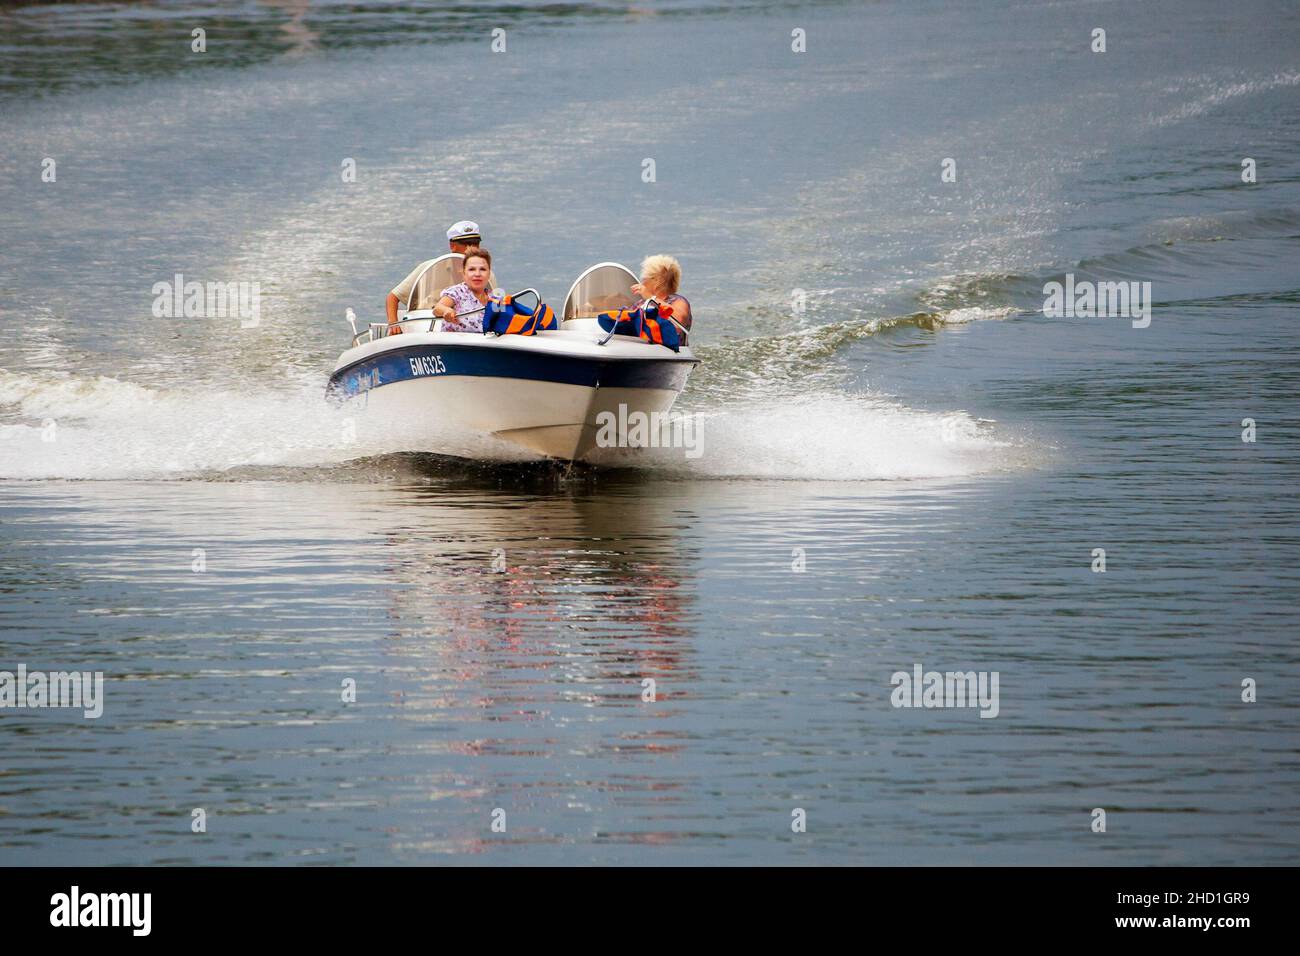 women on a pleasure boat ride in the breeze and have fun Stock Photo